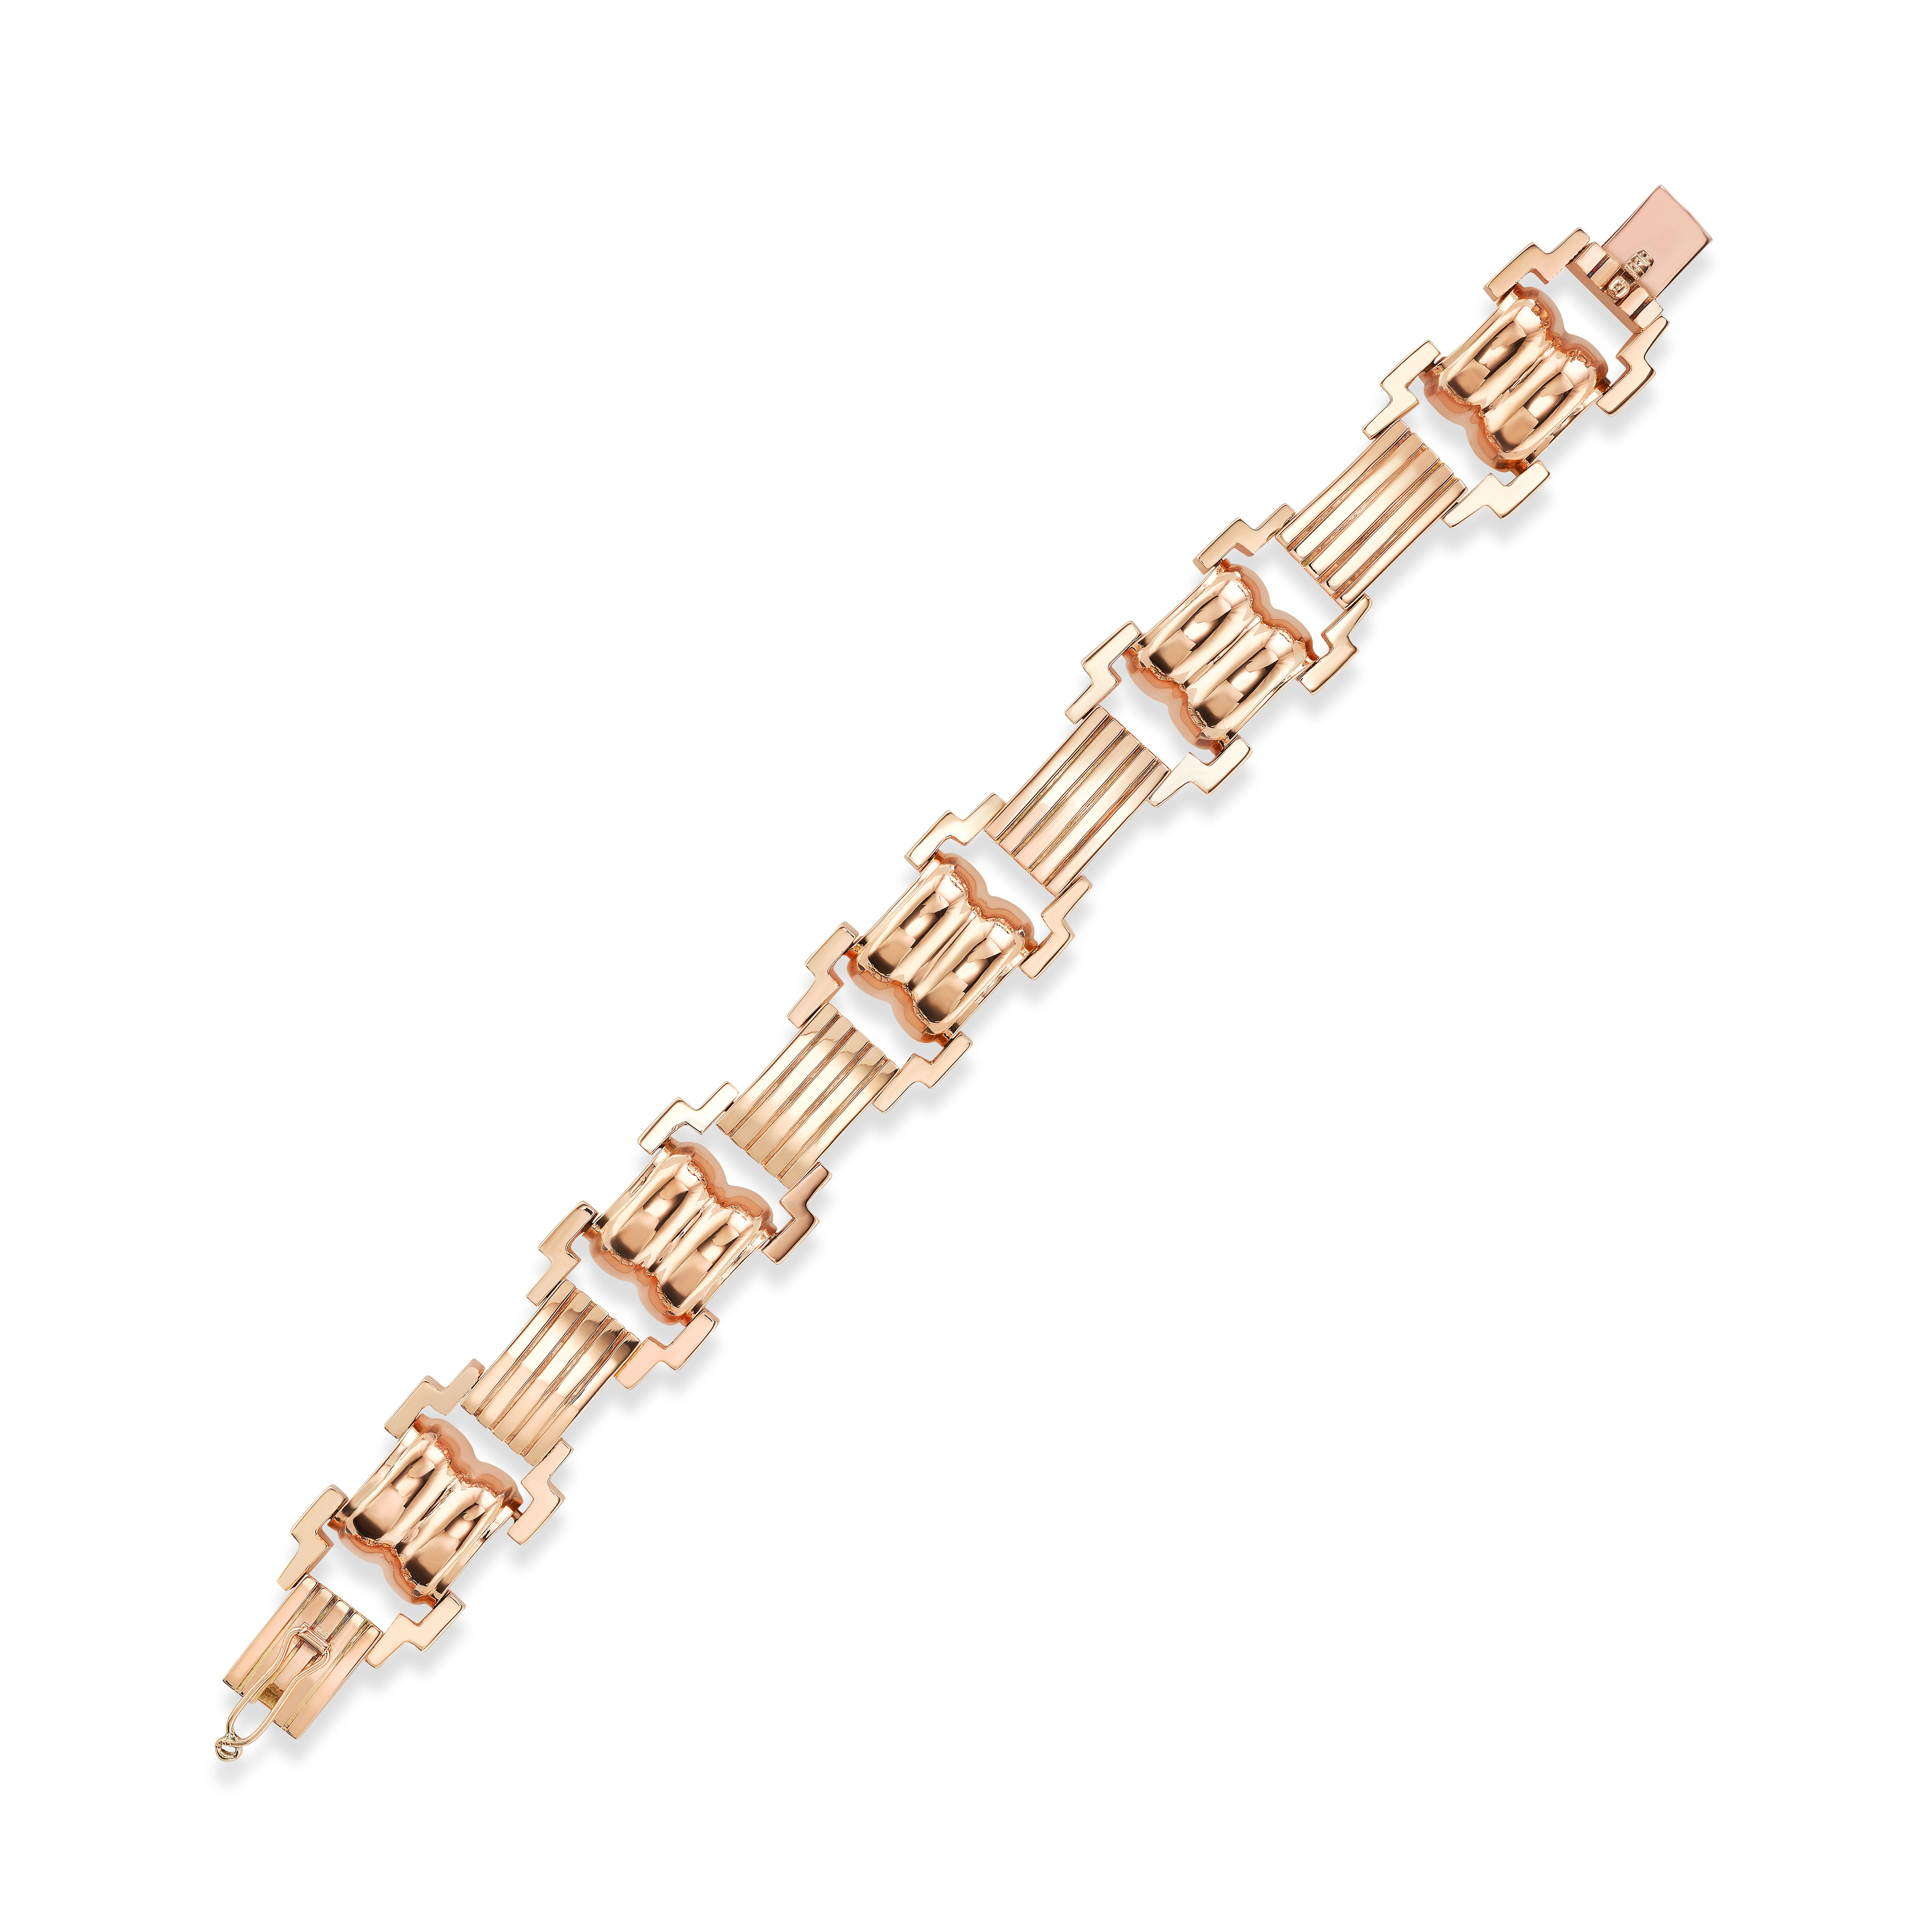 This solid rose gold vintage bracelet with French assay marks features a chic design of alternating domed and rectangular links with Art Deco style embellishments.

Circa 1940's